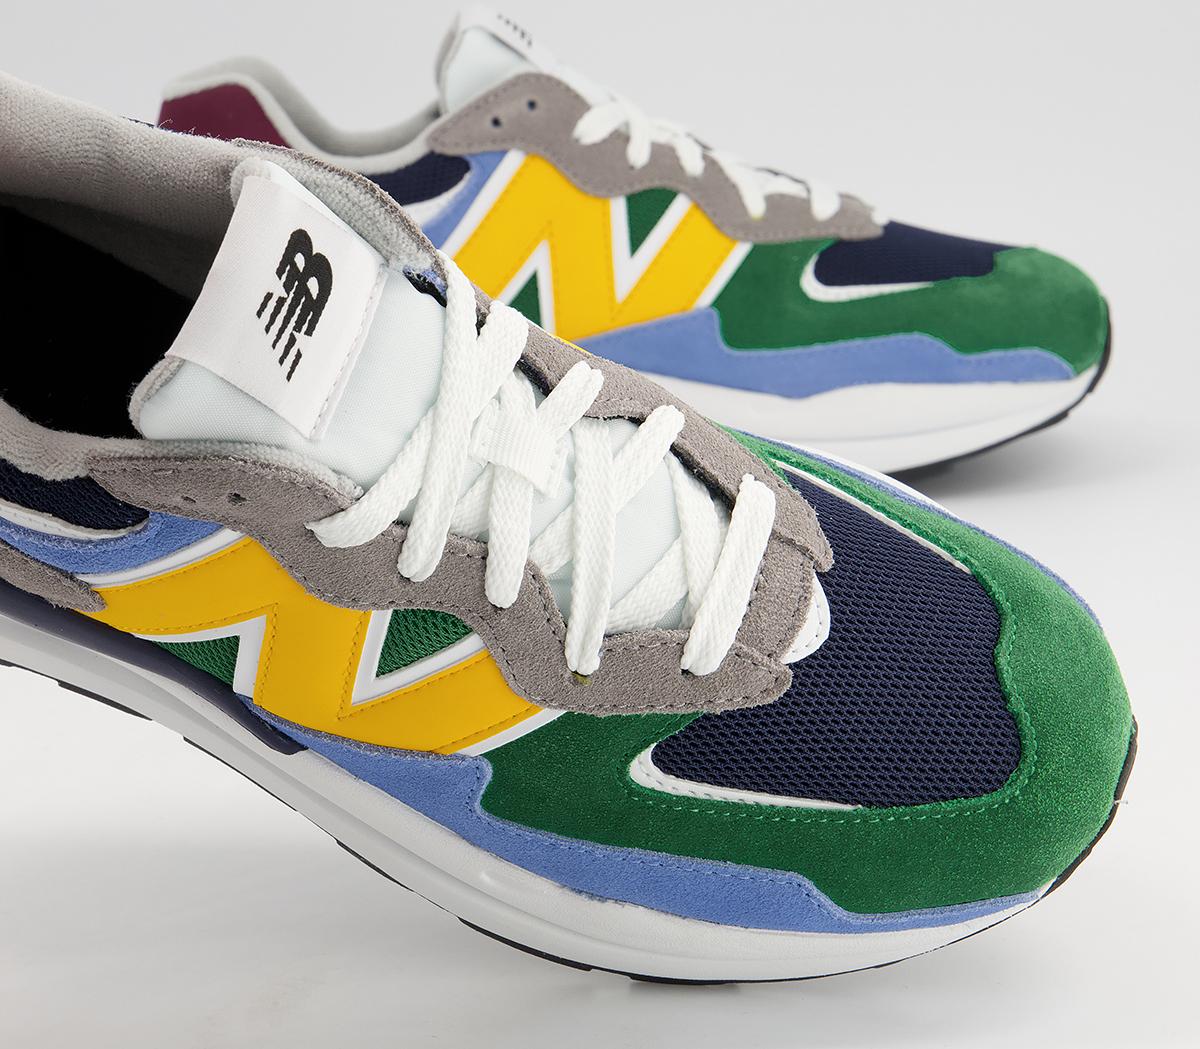 New Balance M5740 Trainers Varsity Green Yellow Multi - His trainers